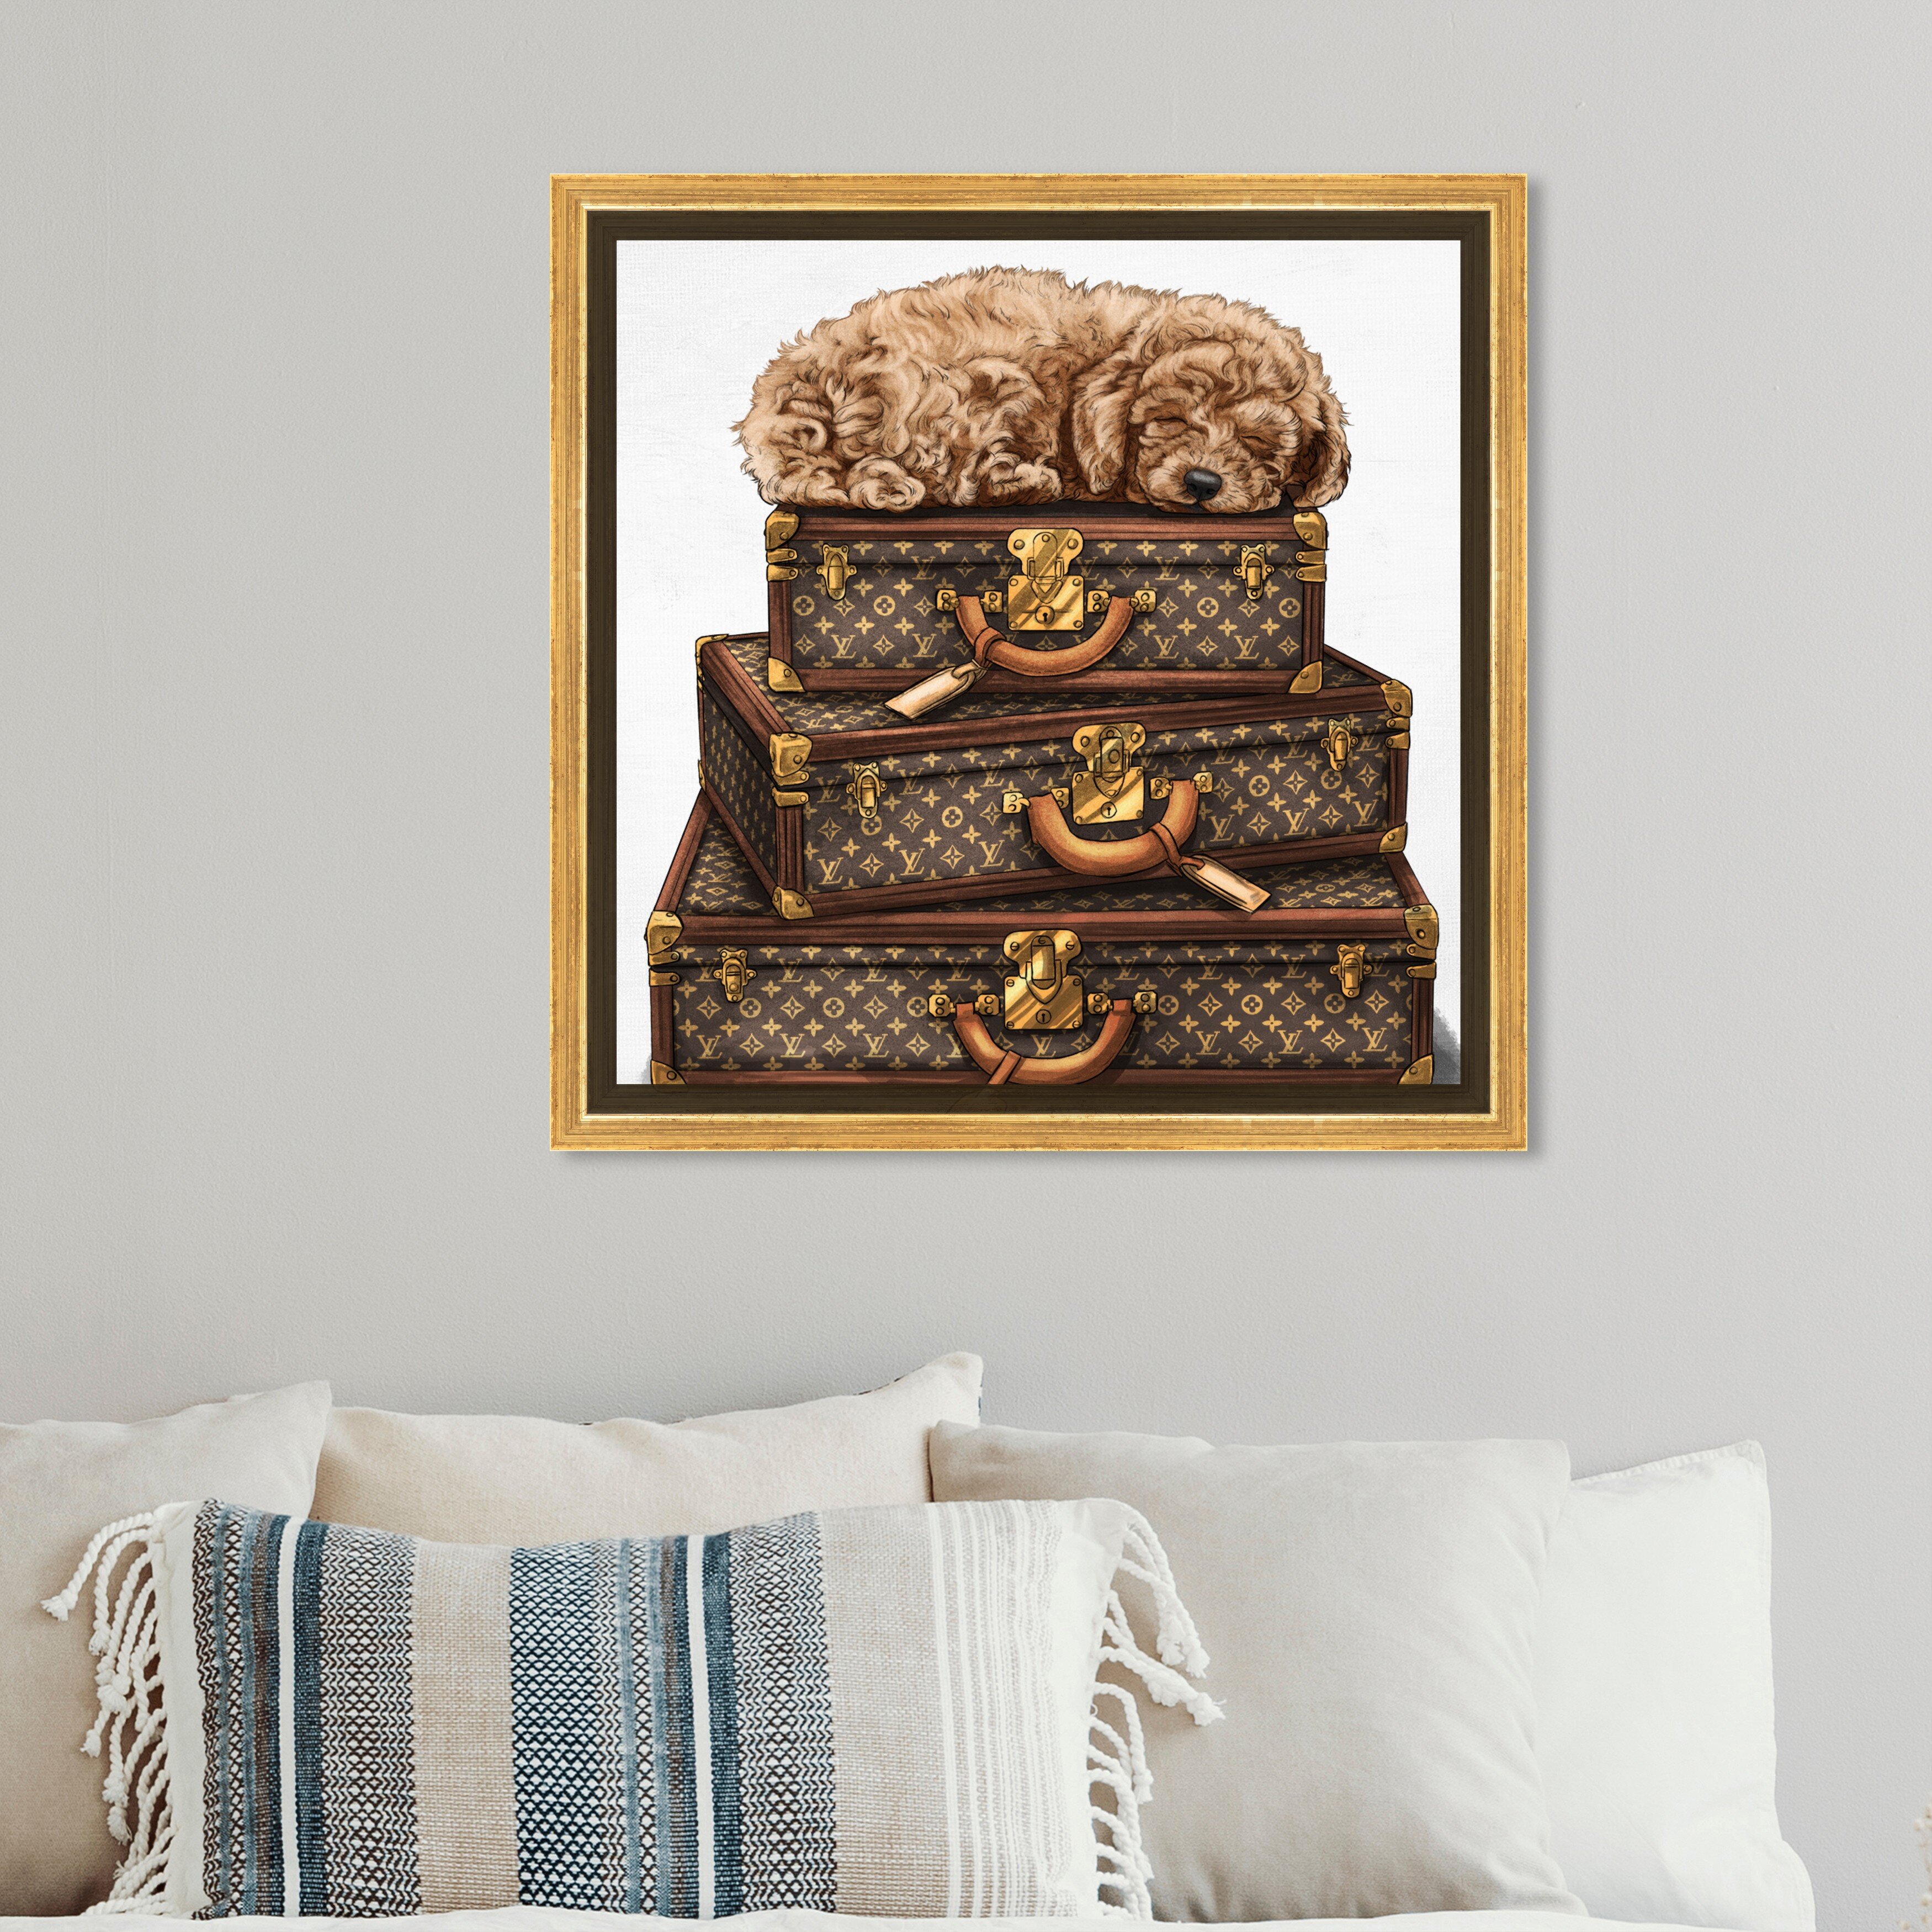 Oliver Gal 'Articles de Voyage Gold' Fashion and Glam Wall Art